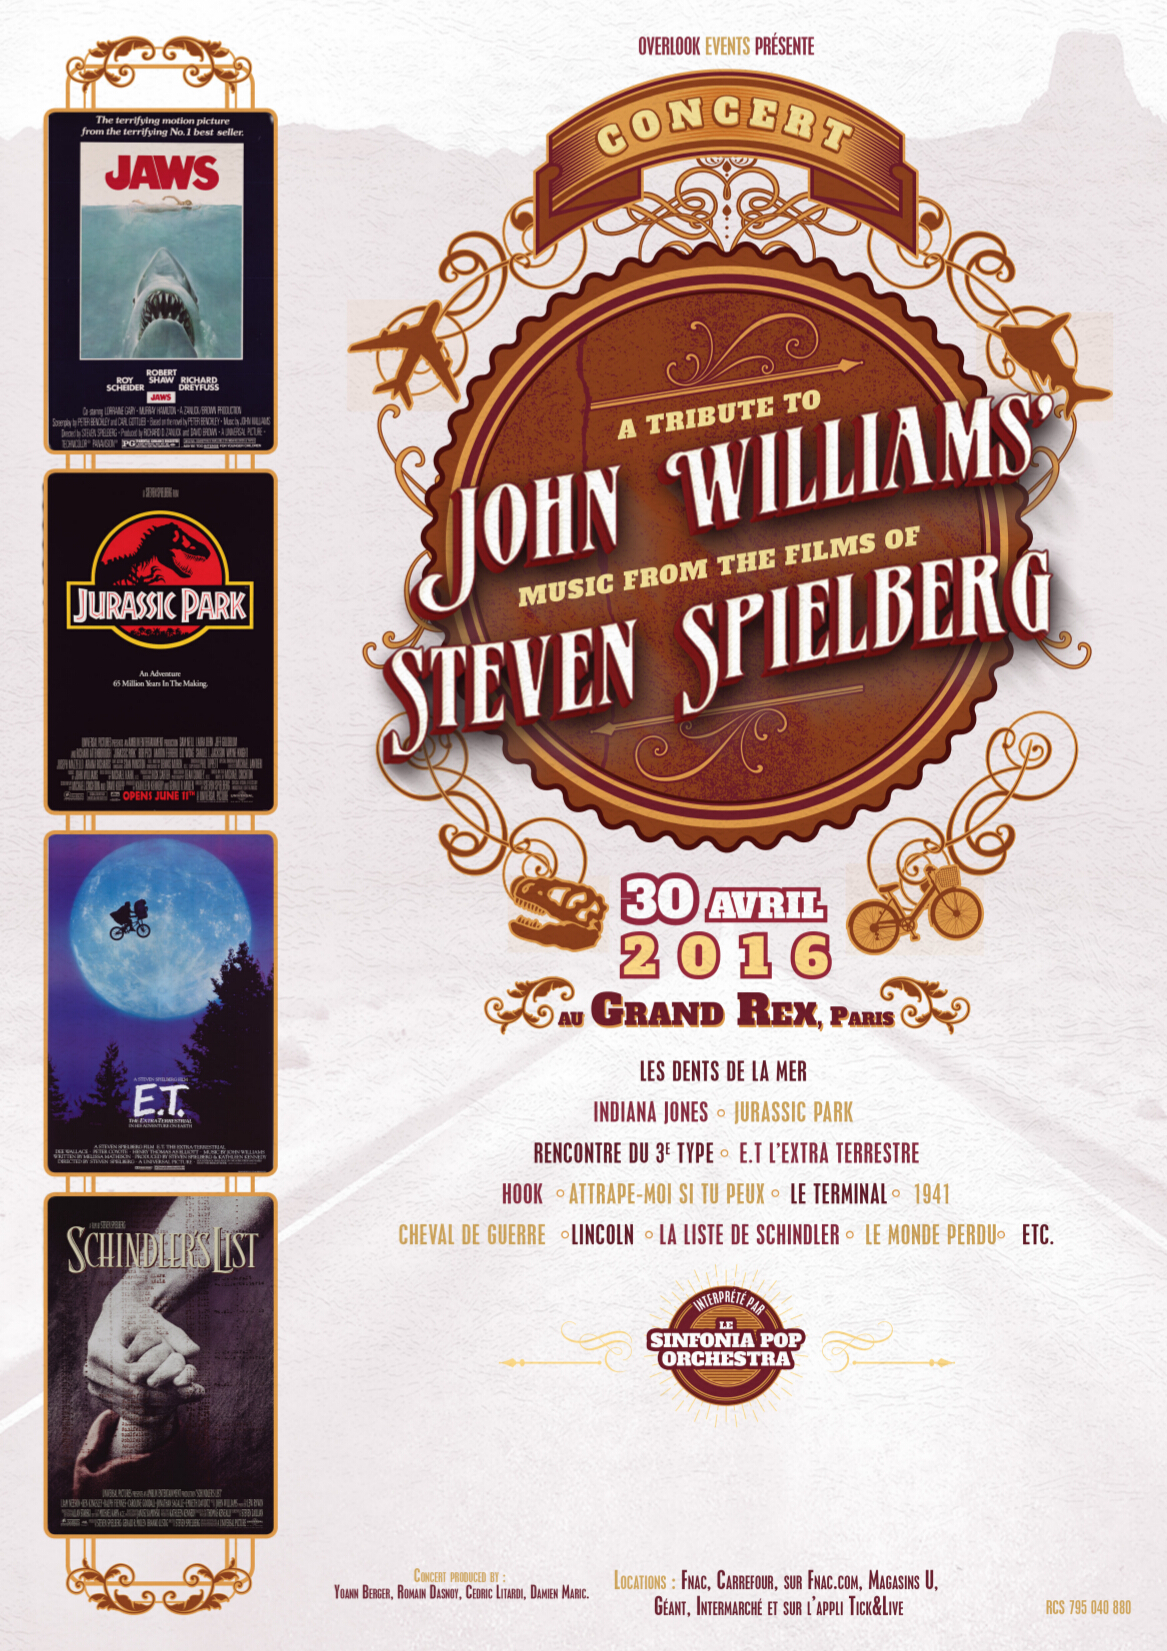 Tribute to John Williams : Music from the films of Steven Spielberg